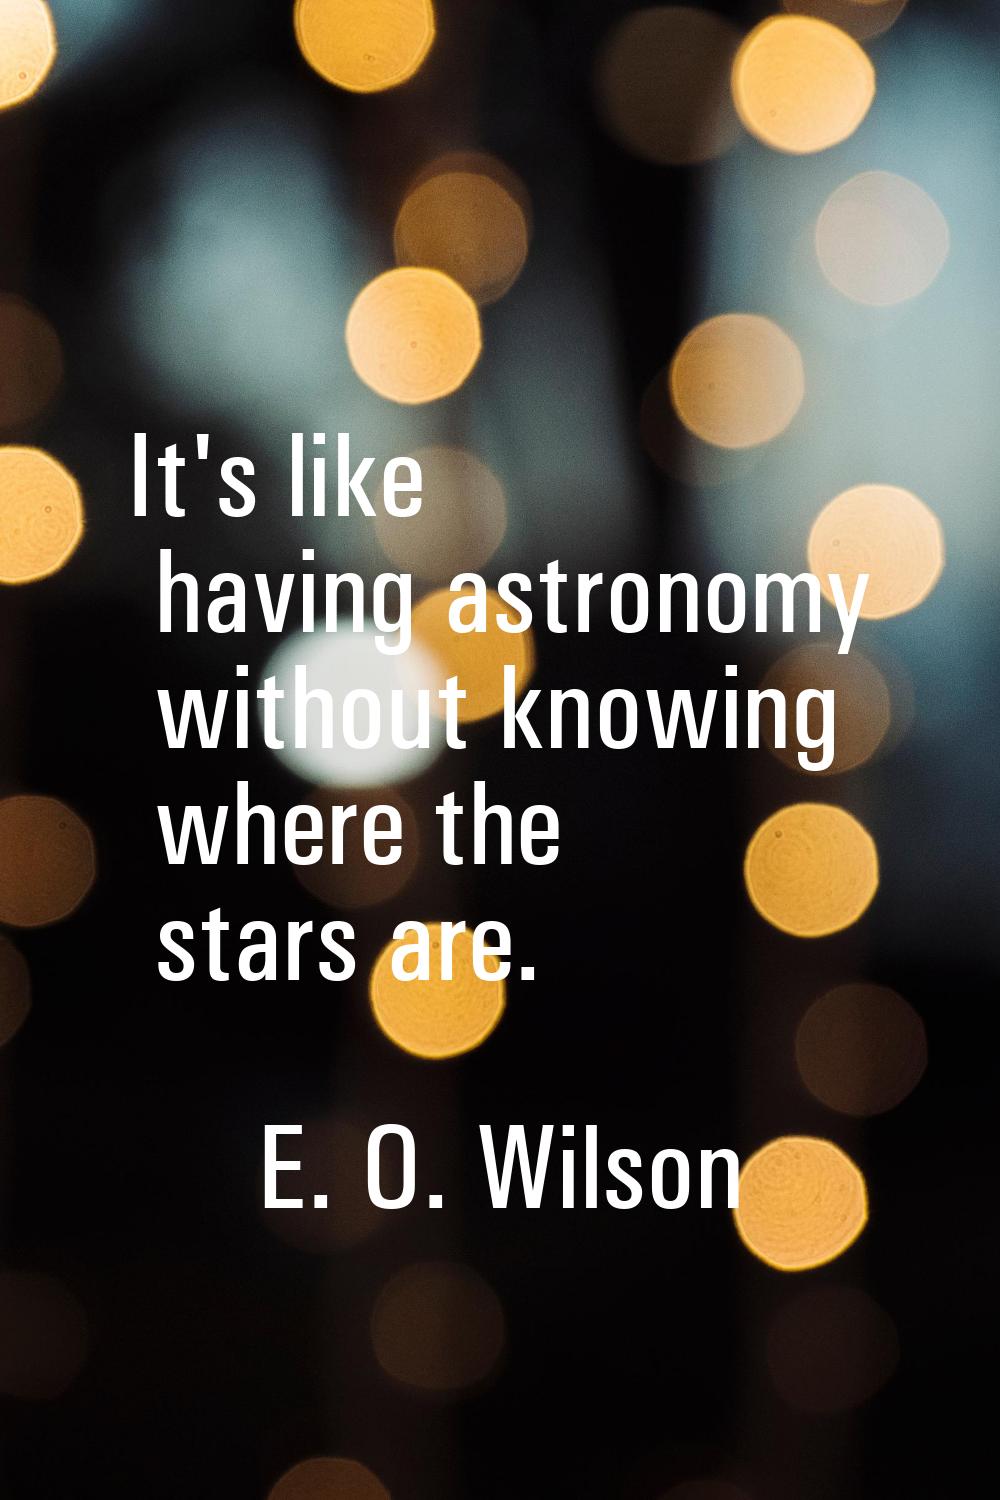 It's like having astronomy without knowing where the stars are.